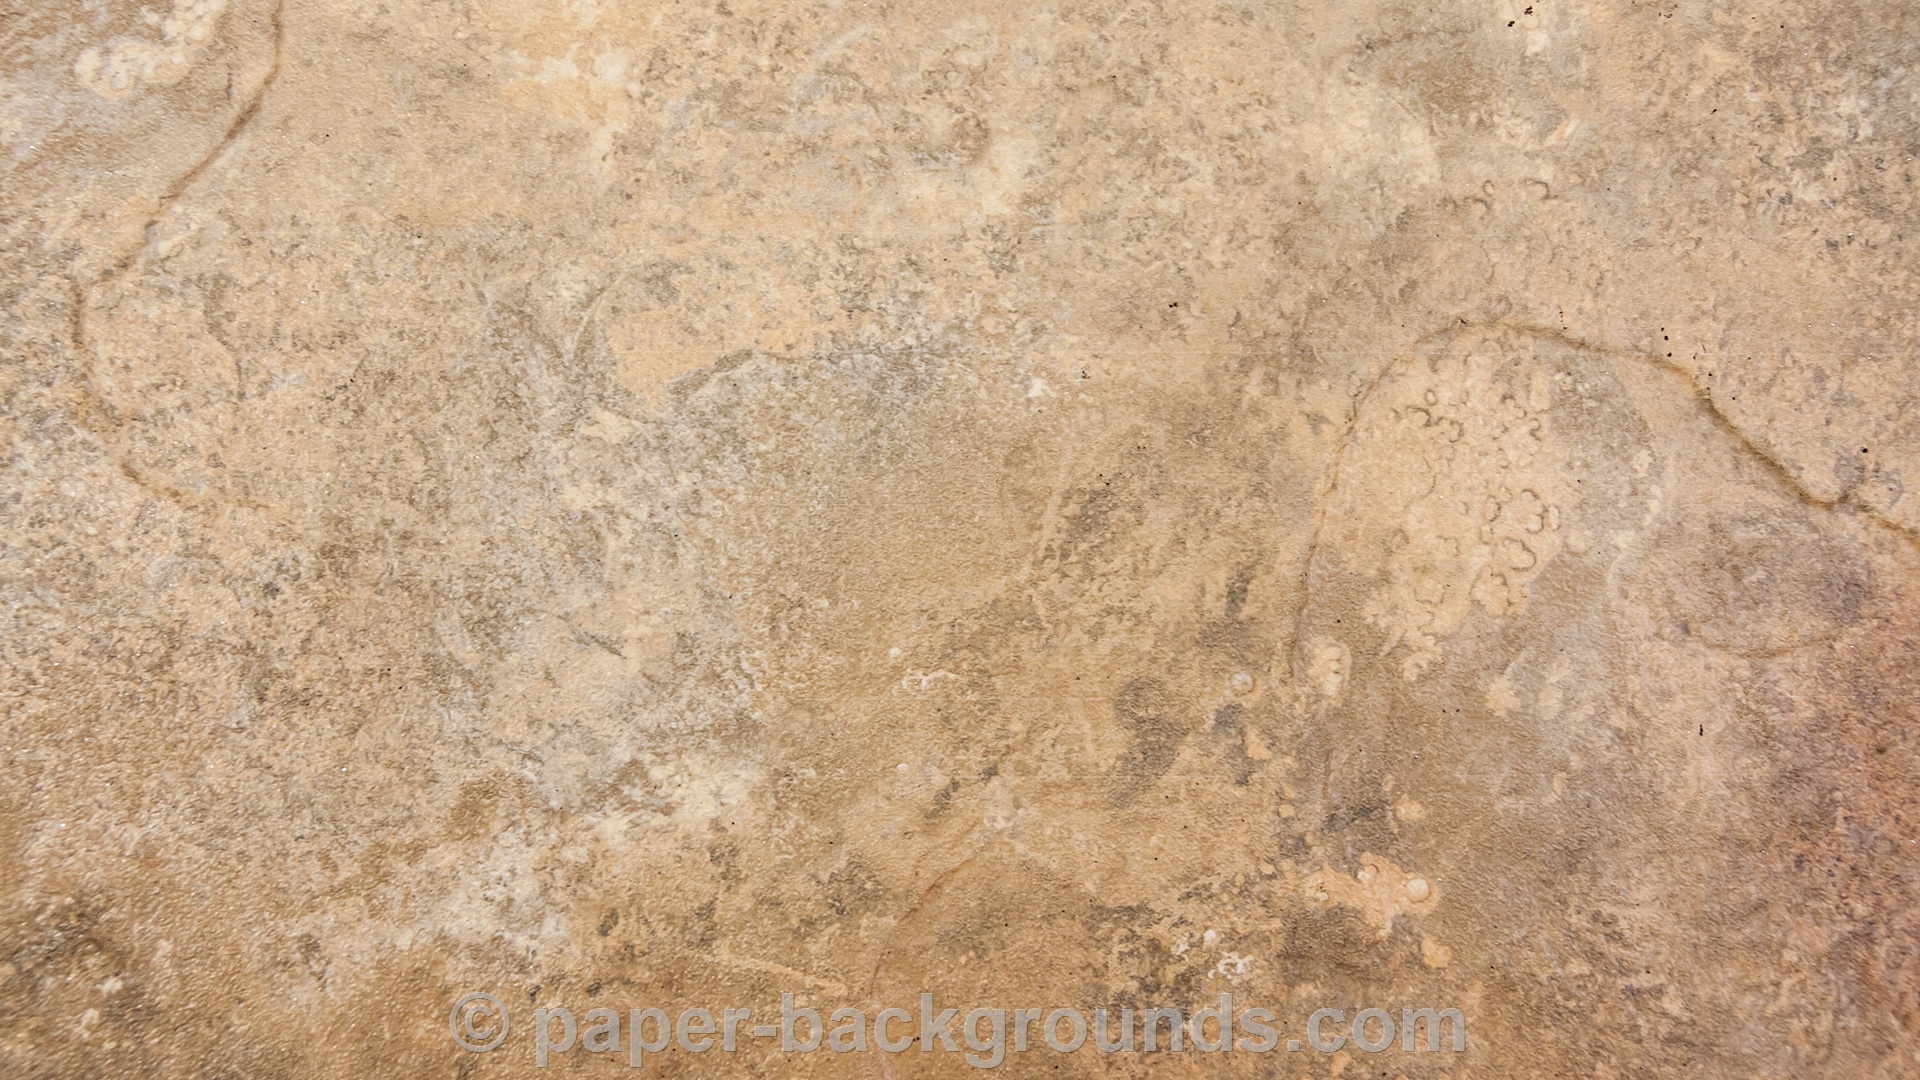 Brown Marble Texture Background HD Paper Background